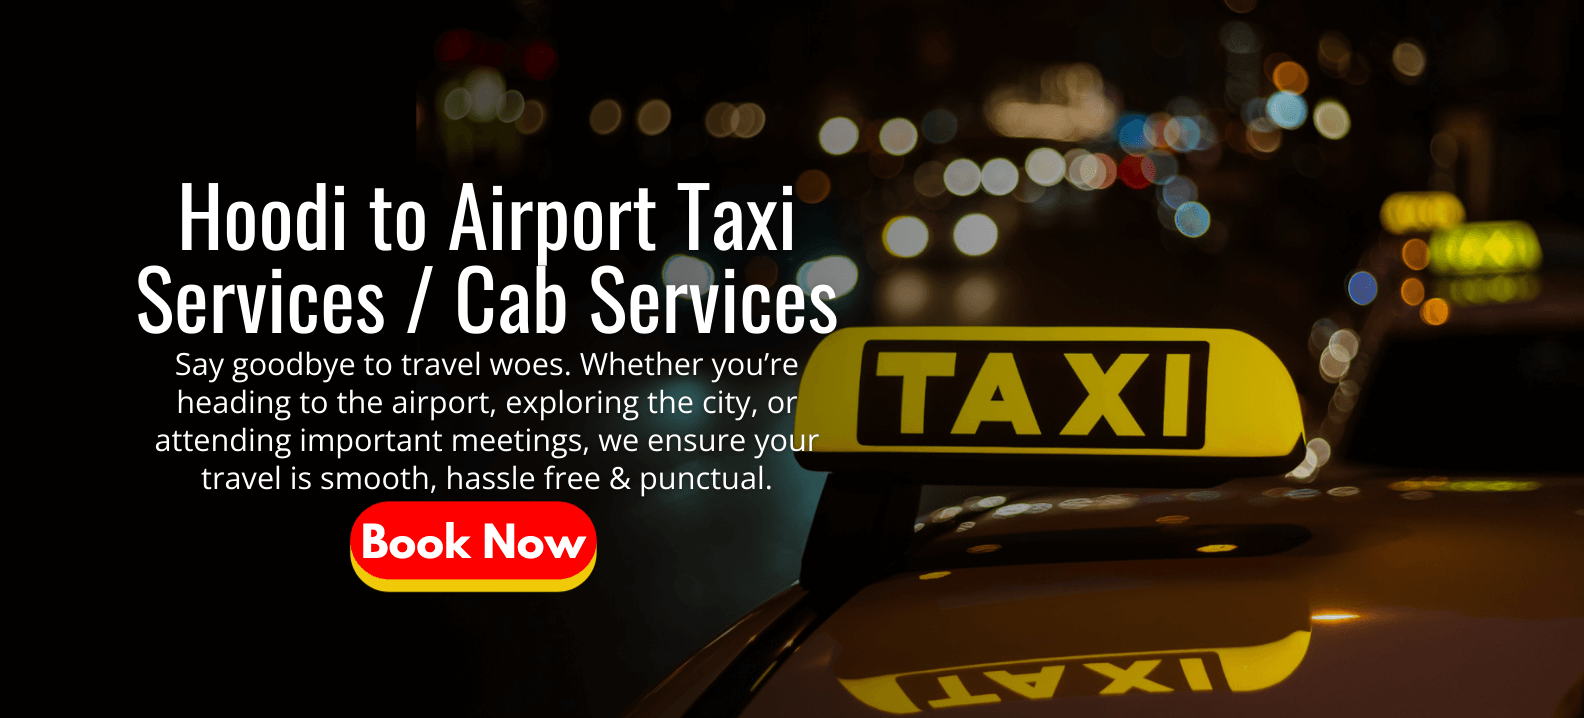 Hoodi to Airport Taxi Services _ Cab Services